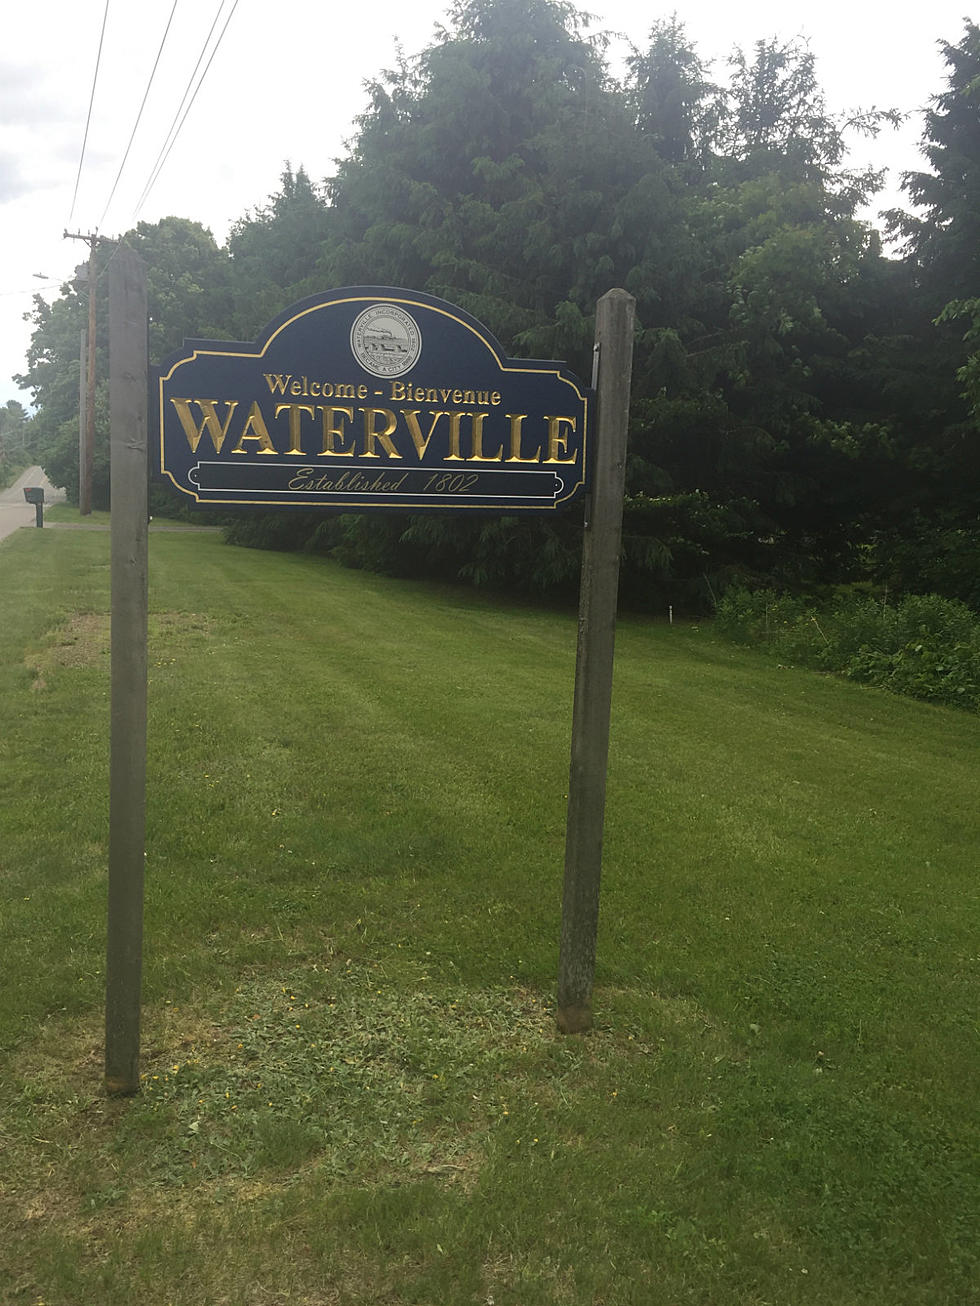 Celebrate The Taste Of Waterville On Wednesday, August 3rd